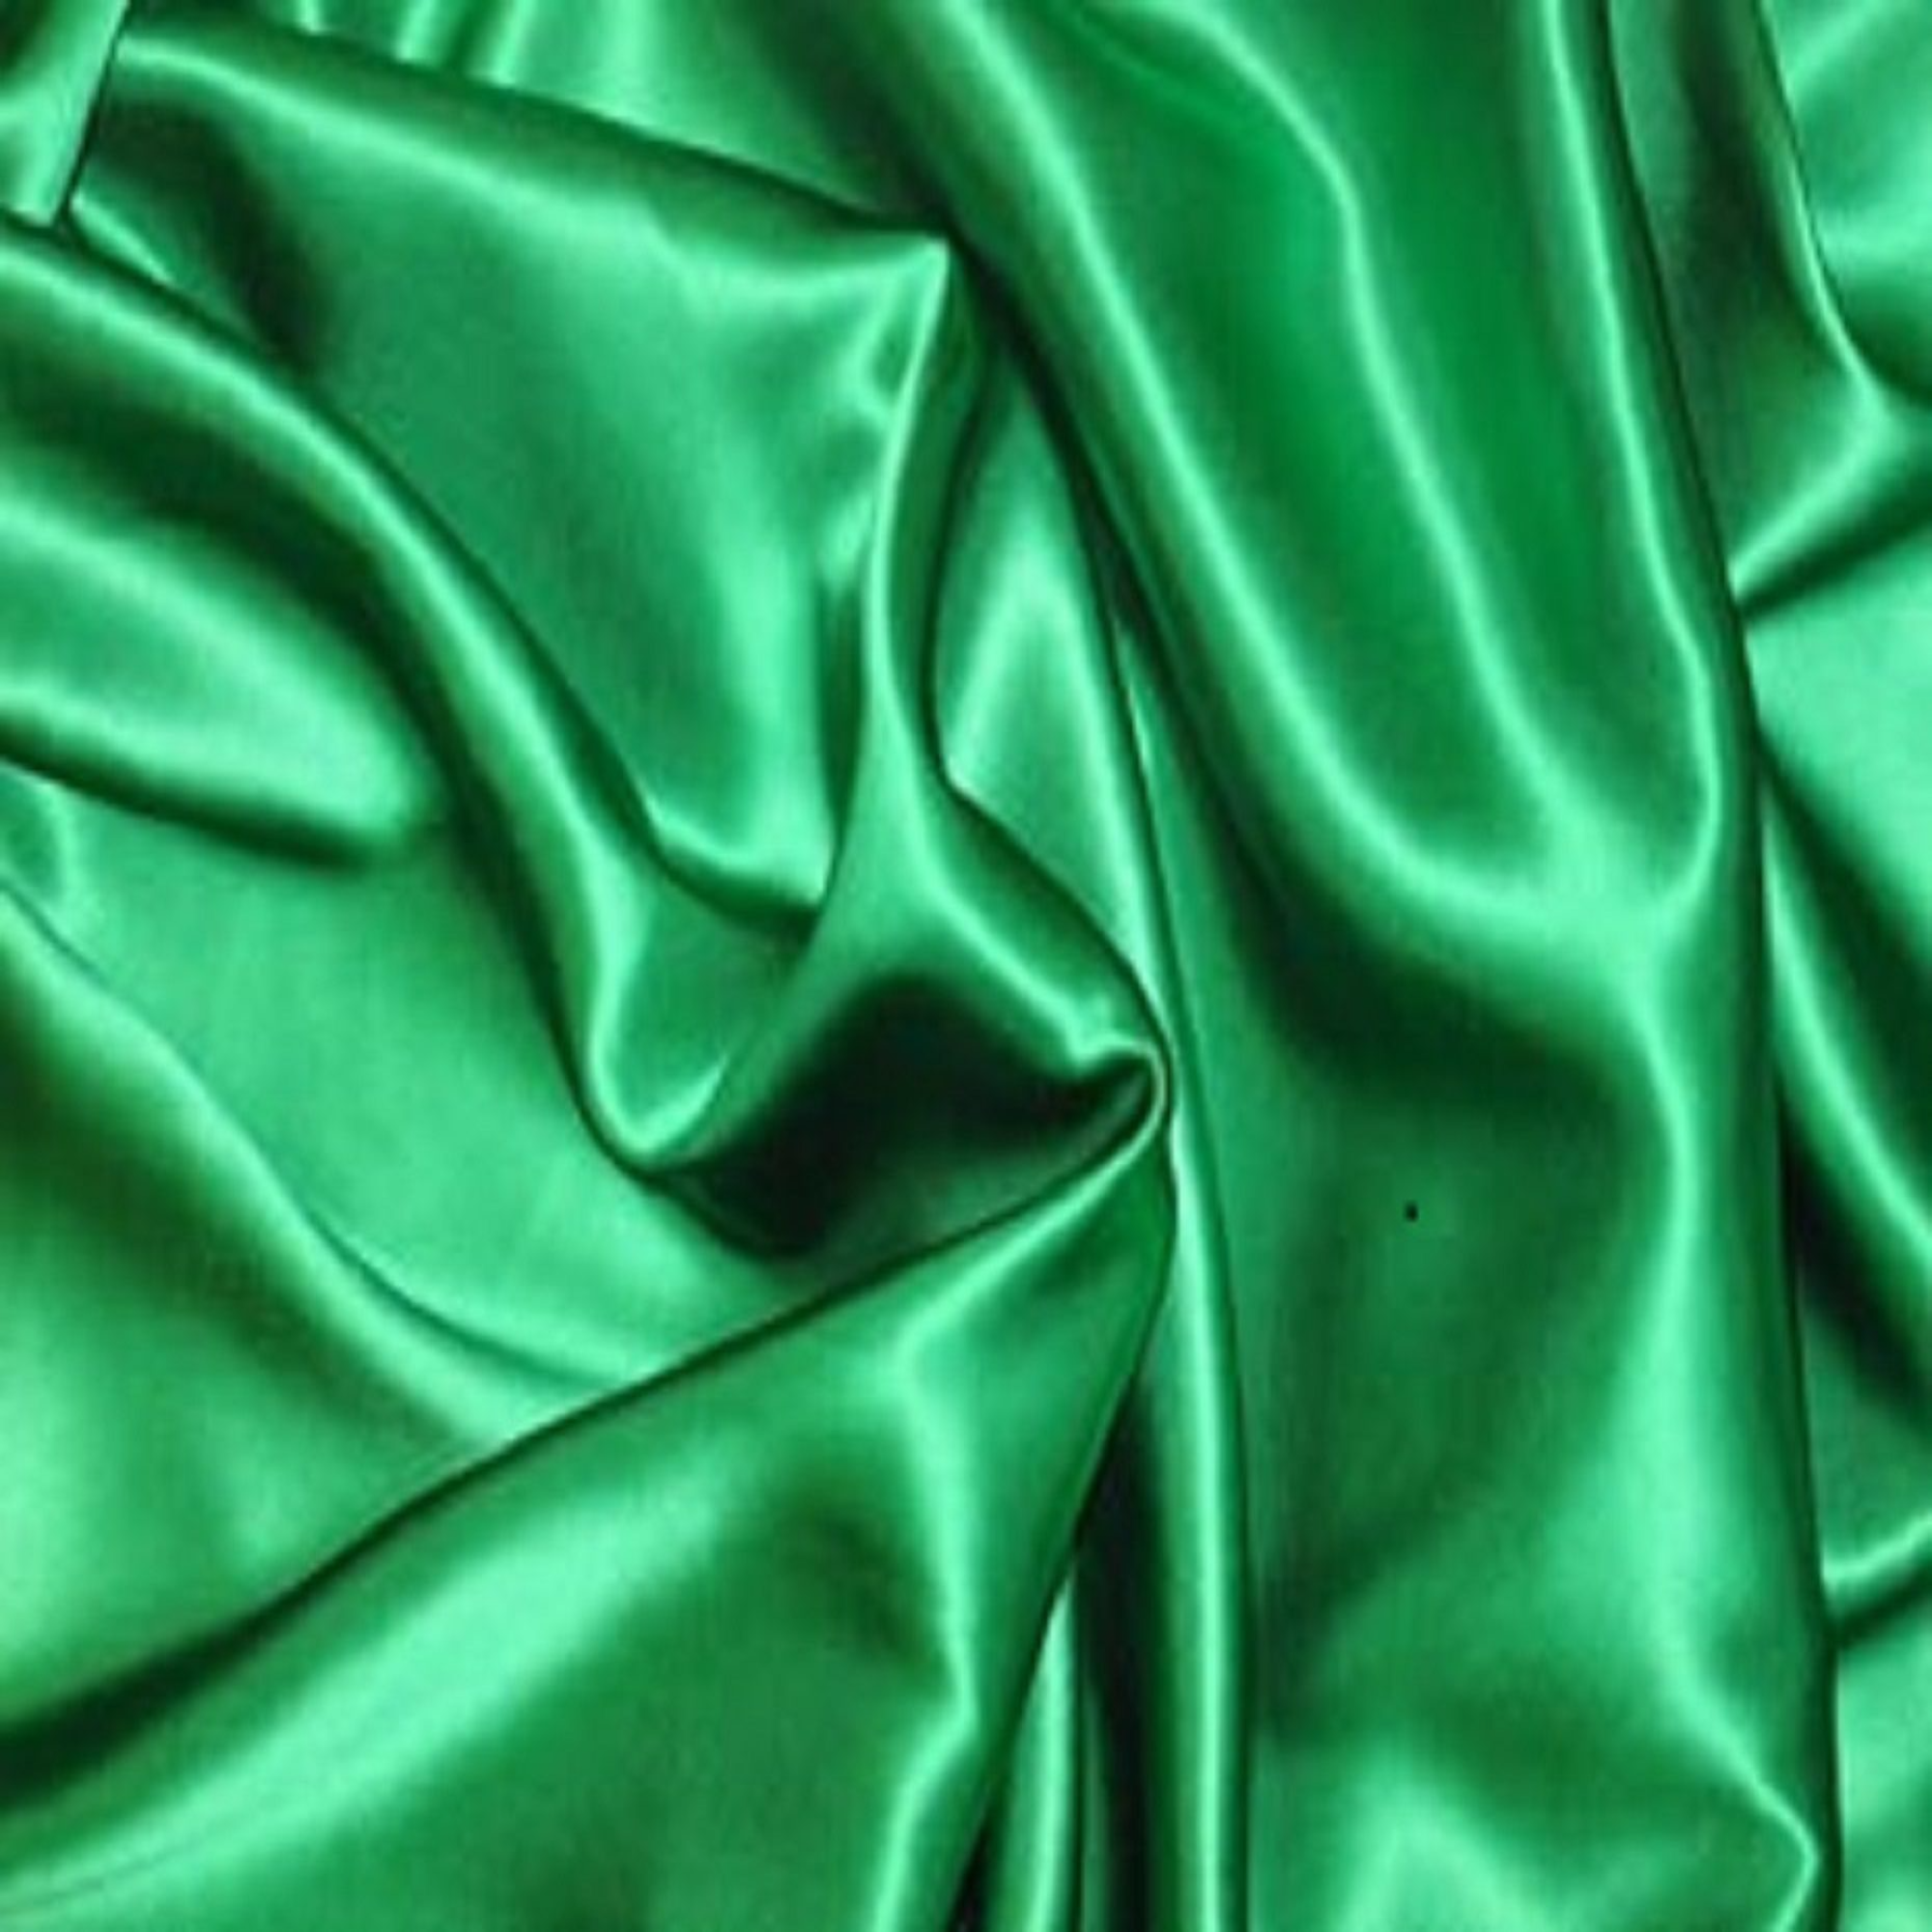 https://www.awlfabrics.co.uk/Graphics/Std_Product_Images/emerald-green-satin-fabric-from-1.20--choose-metres-50-metre-1340-p.png